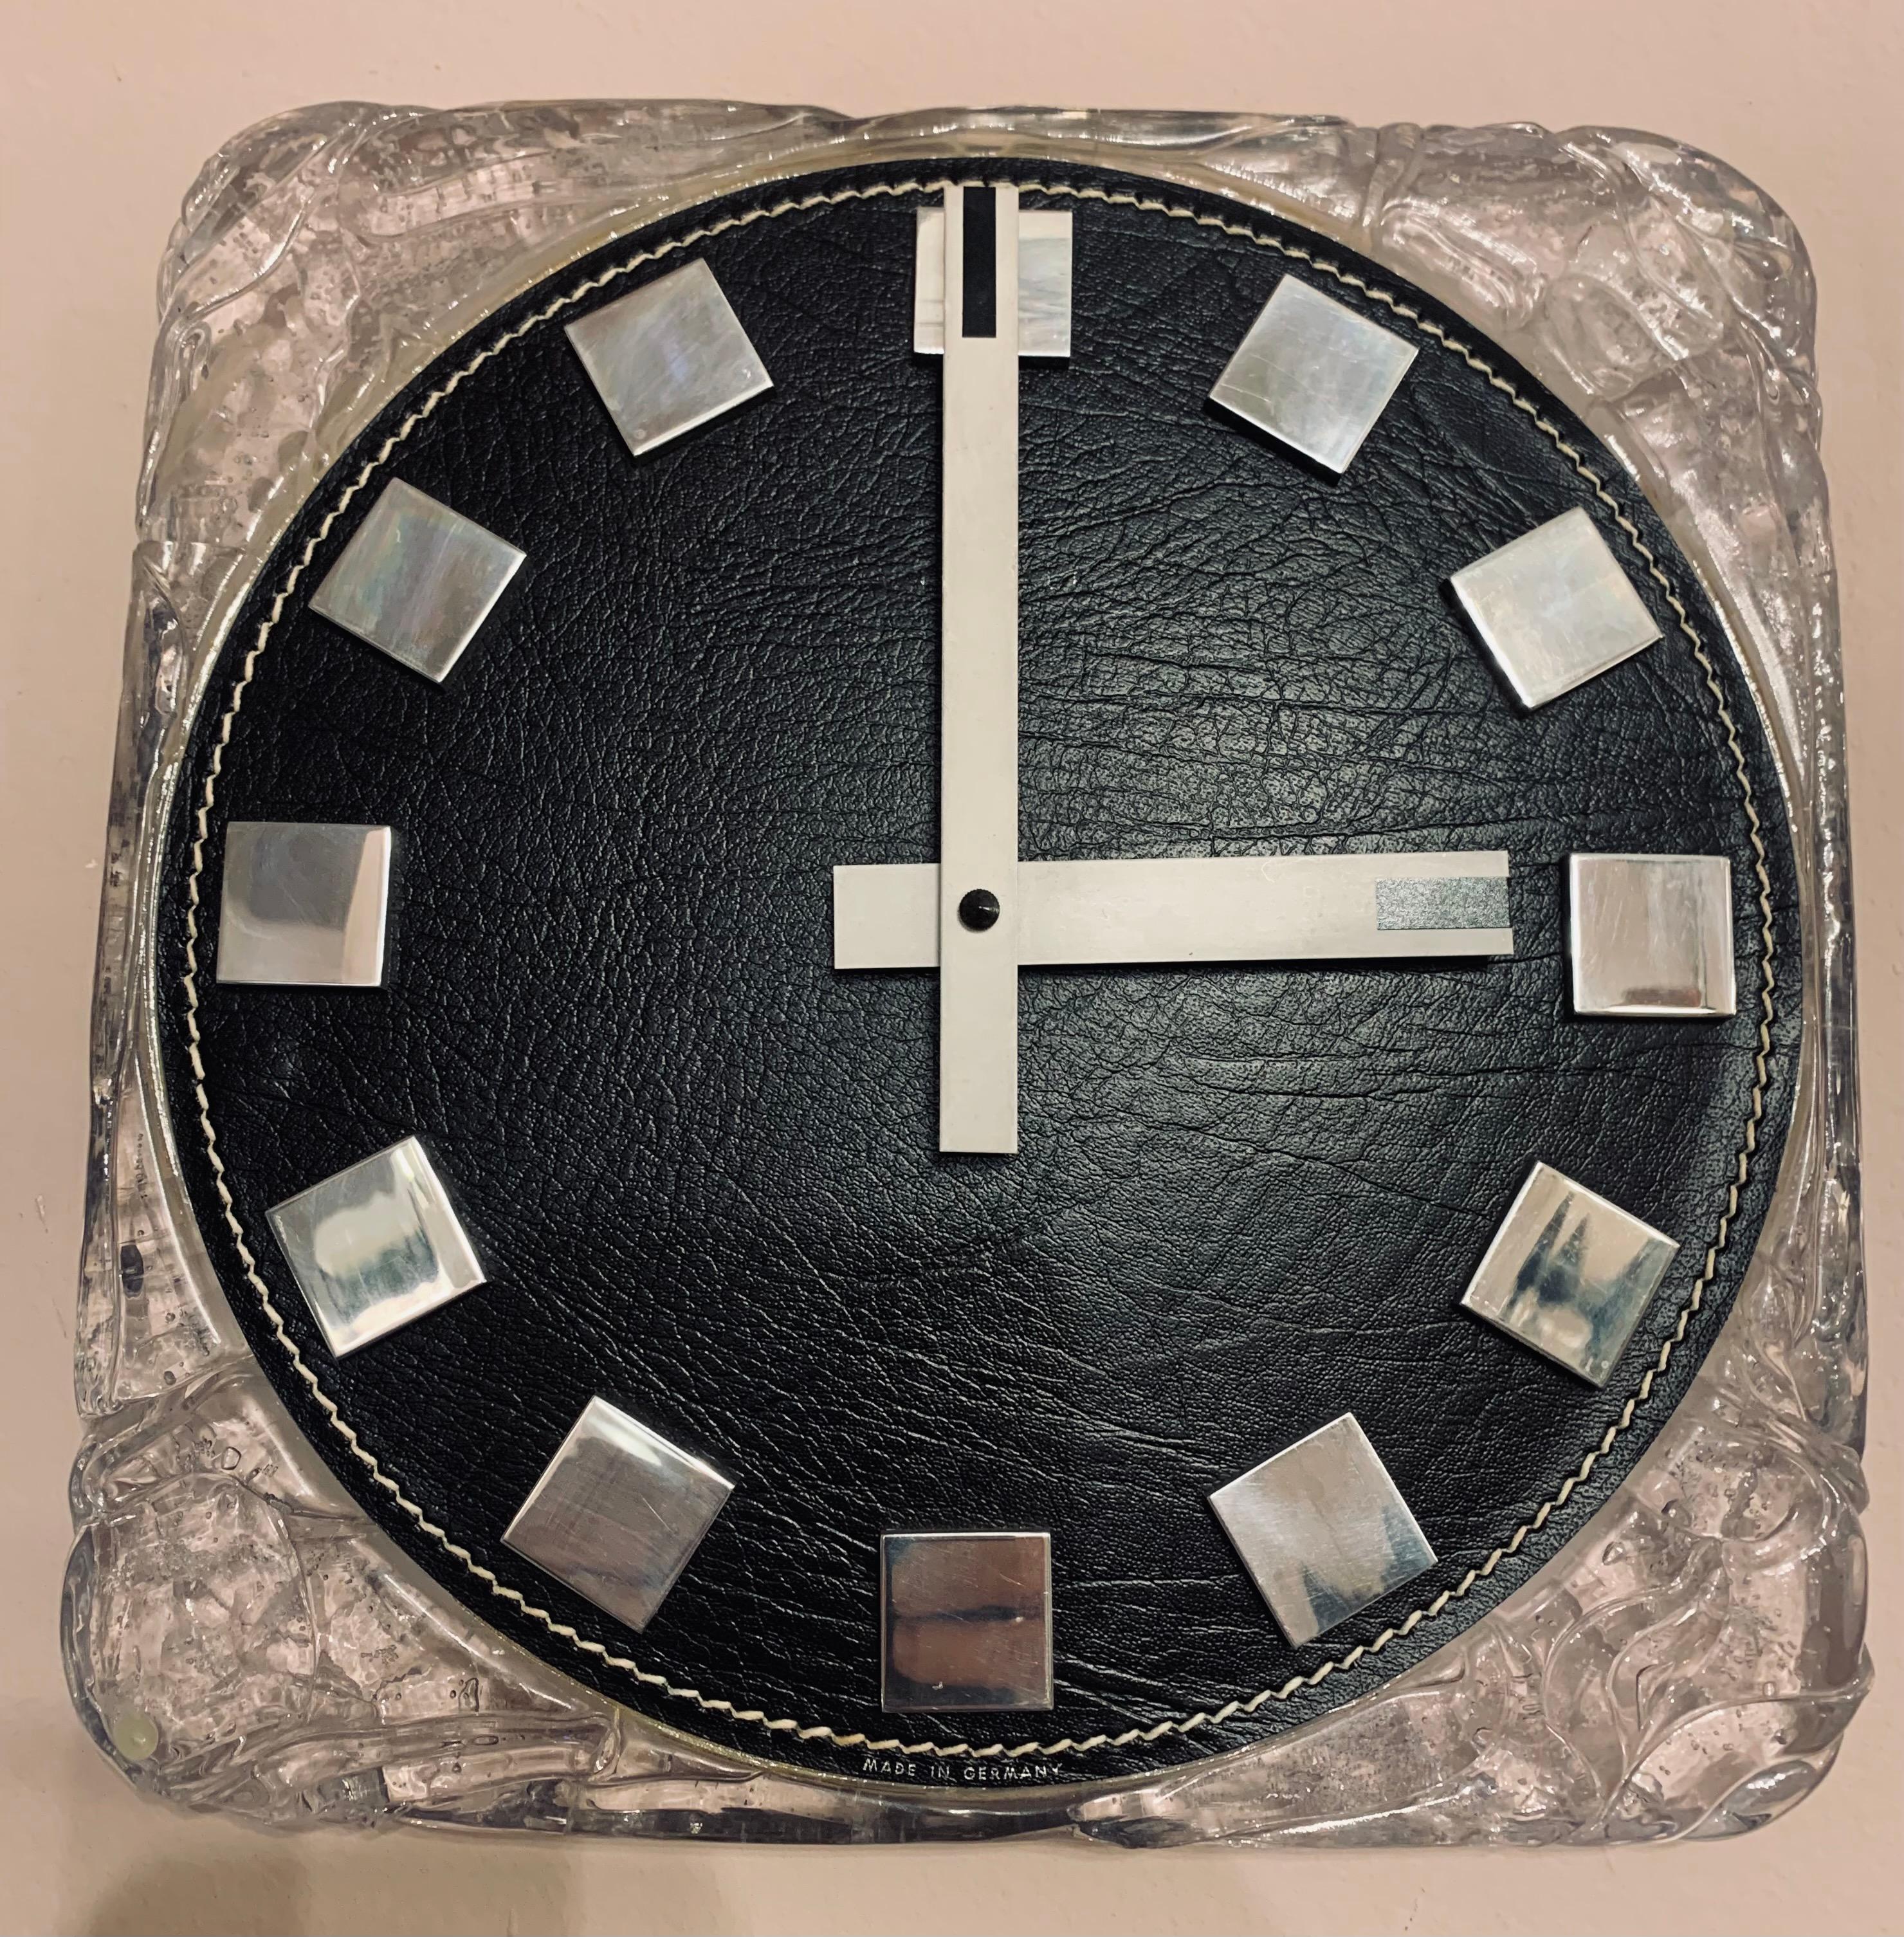 A vintage German wall clock manufactured by Kienzle in the 1970s. The clock features a black leather round clock face with white stitched detail around the circumference. Stainless steel squares designate the hours with contrasting white hour and